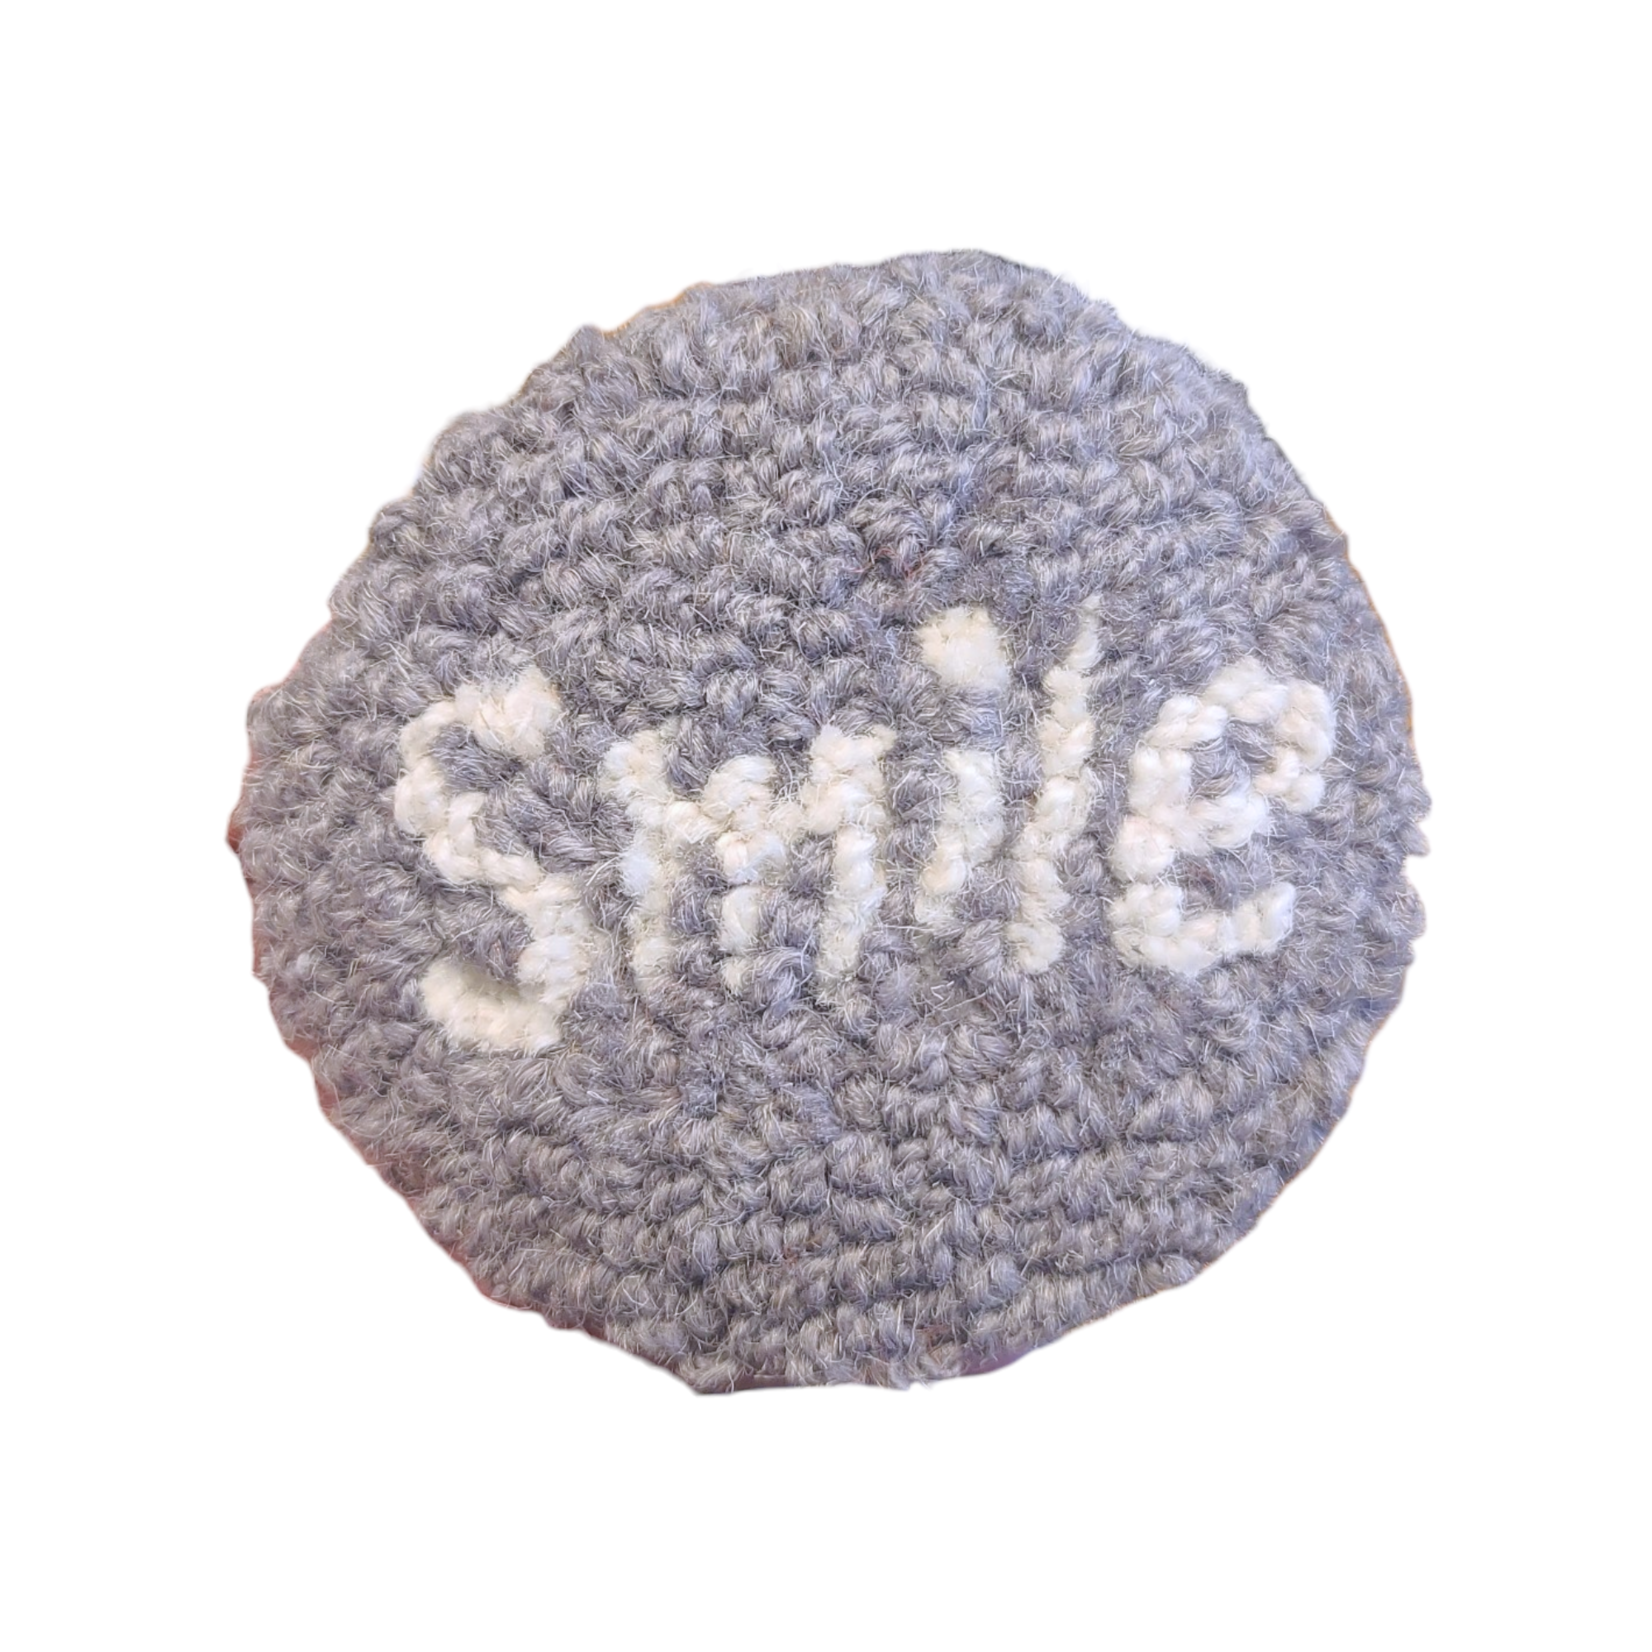 Set of Two Smile Laugh Wool Hooked Coasters